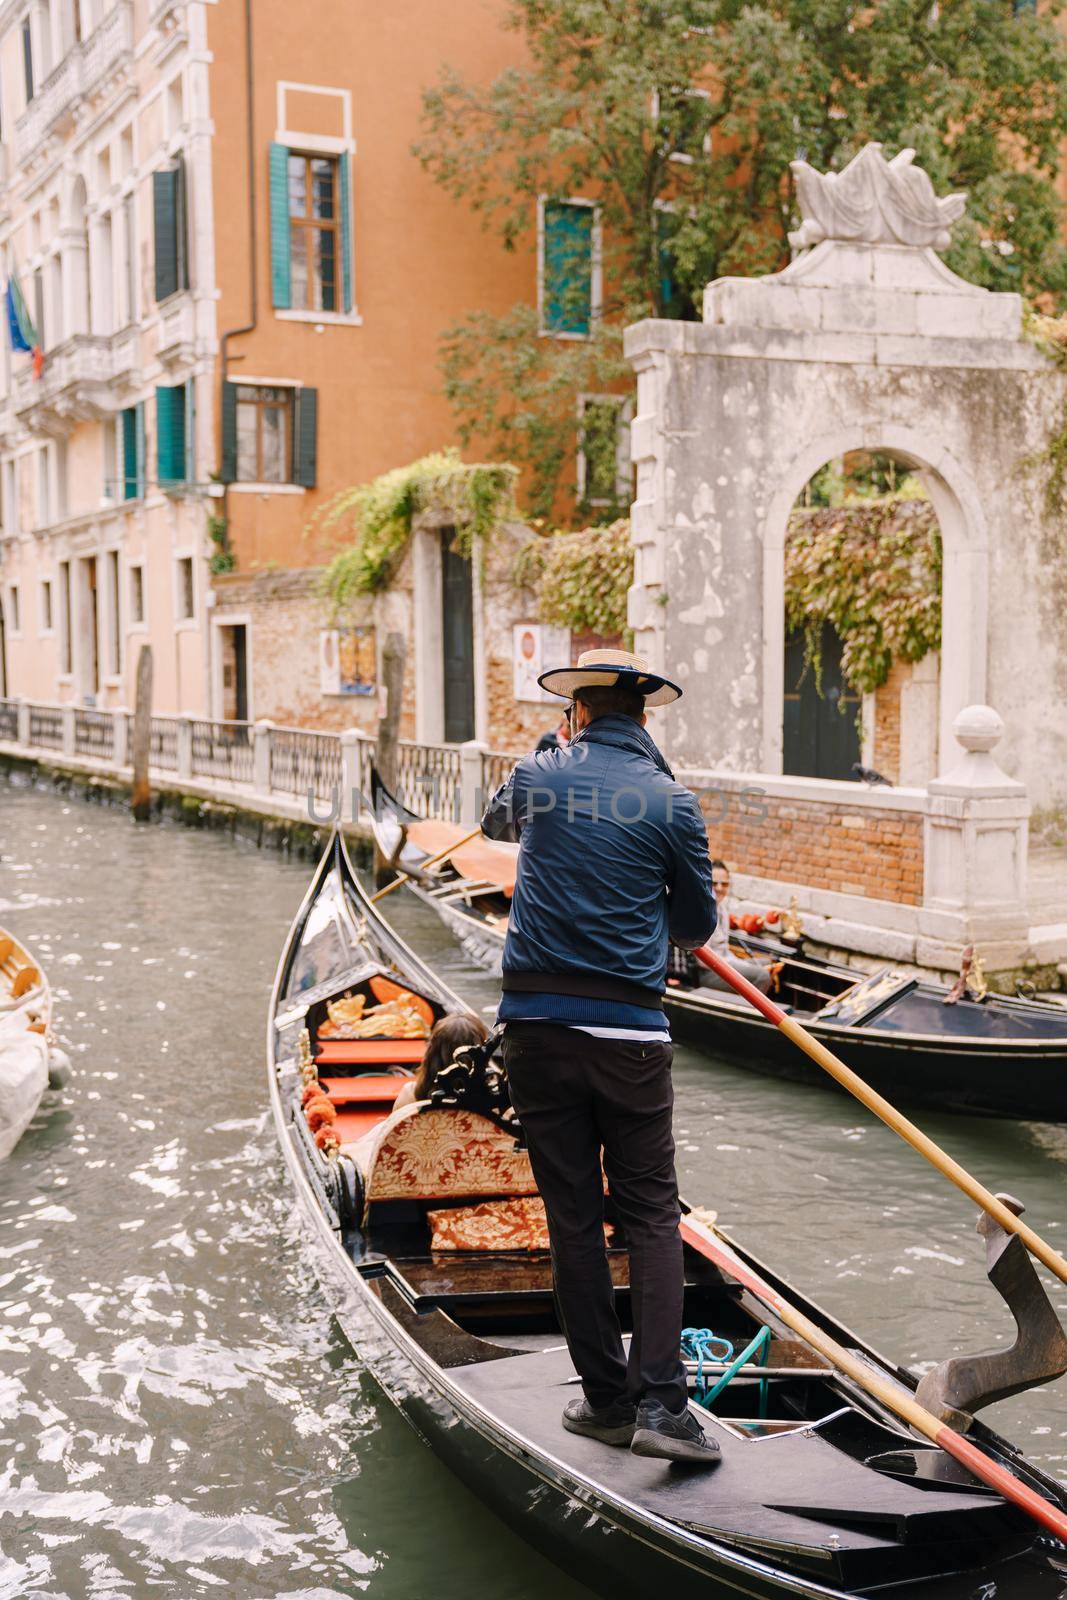 The gondolier rides the bride and groom in a classic wooden gondola along a narrow Venetian canal. The spin of the gondolier is controlled by a boat with a paddle.